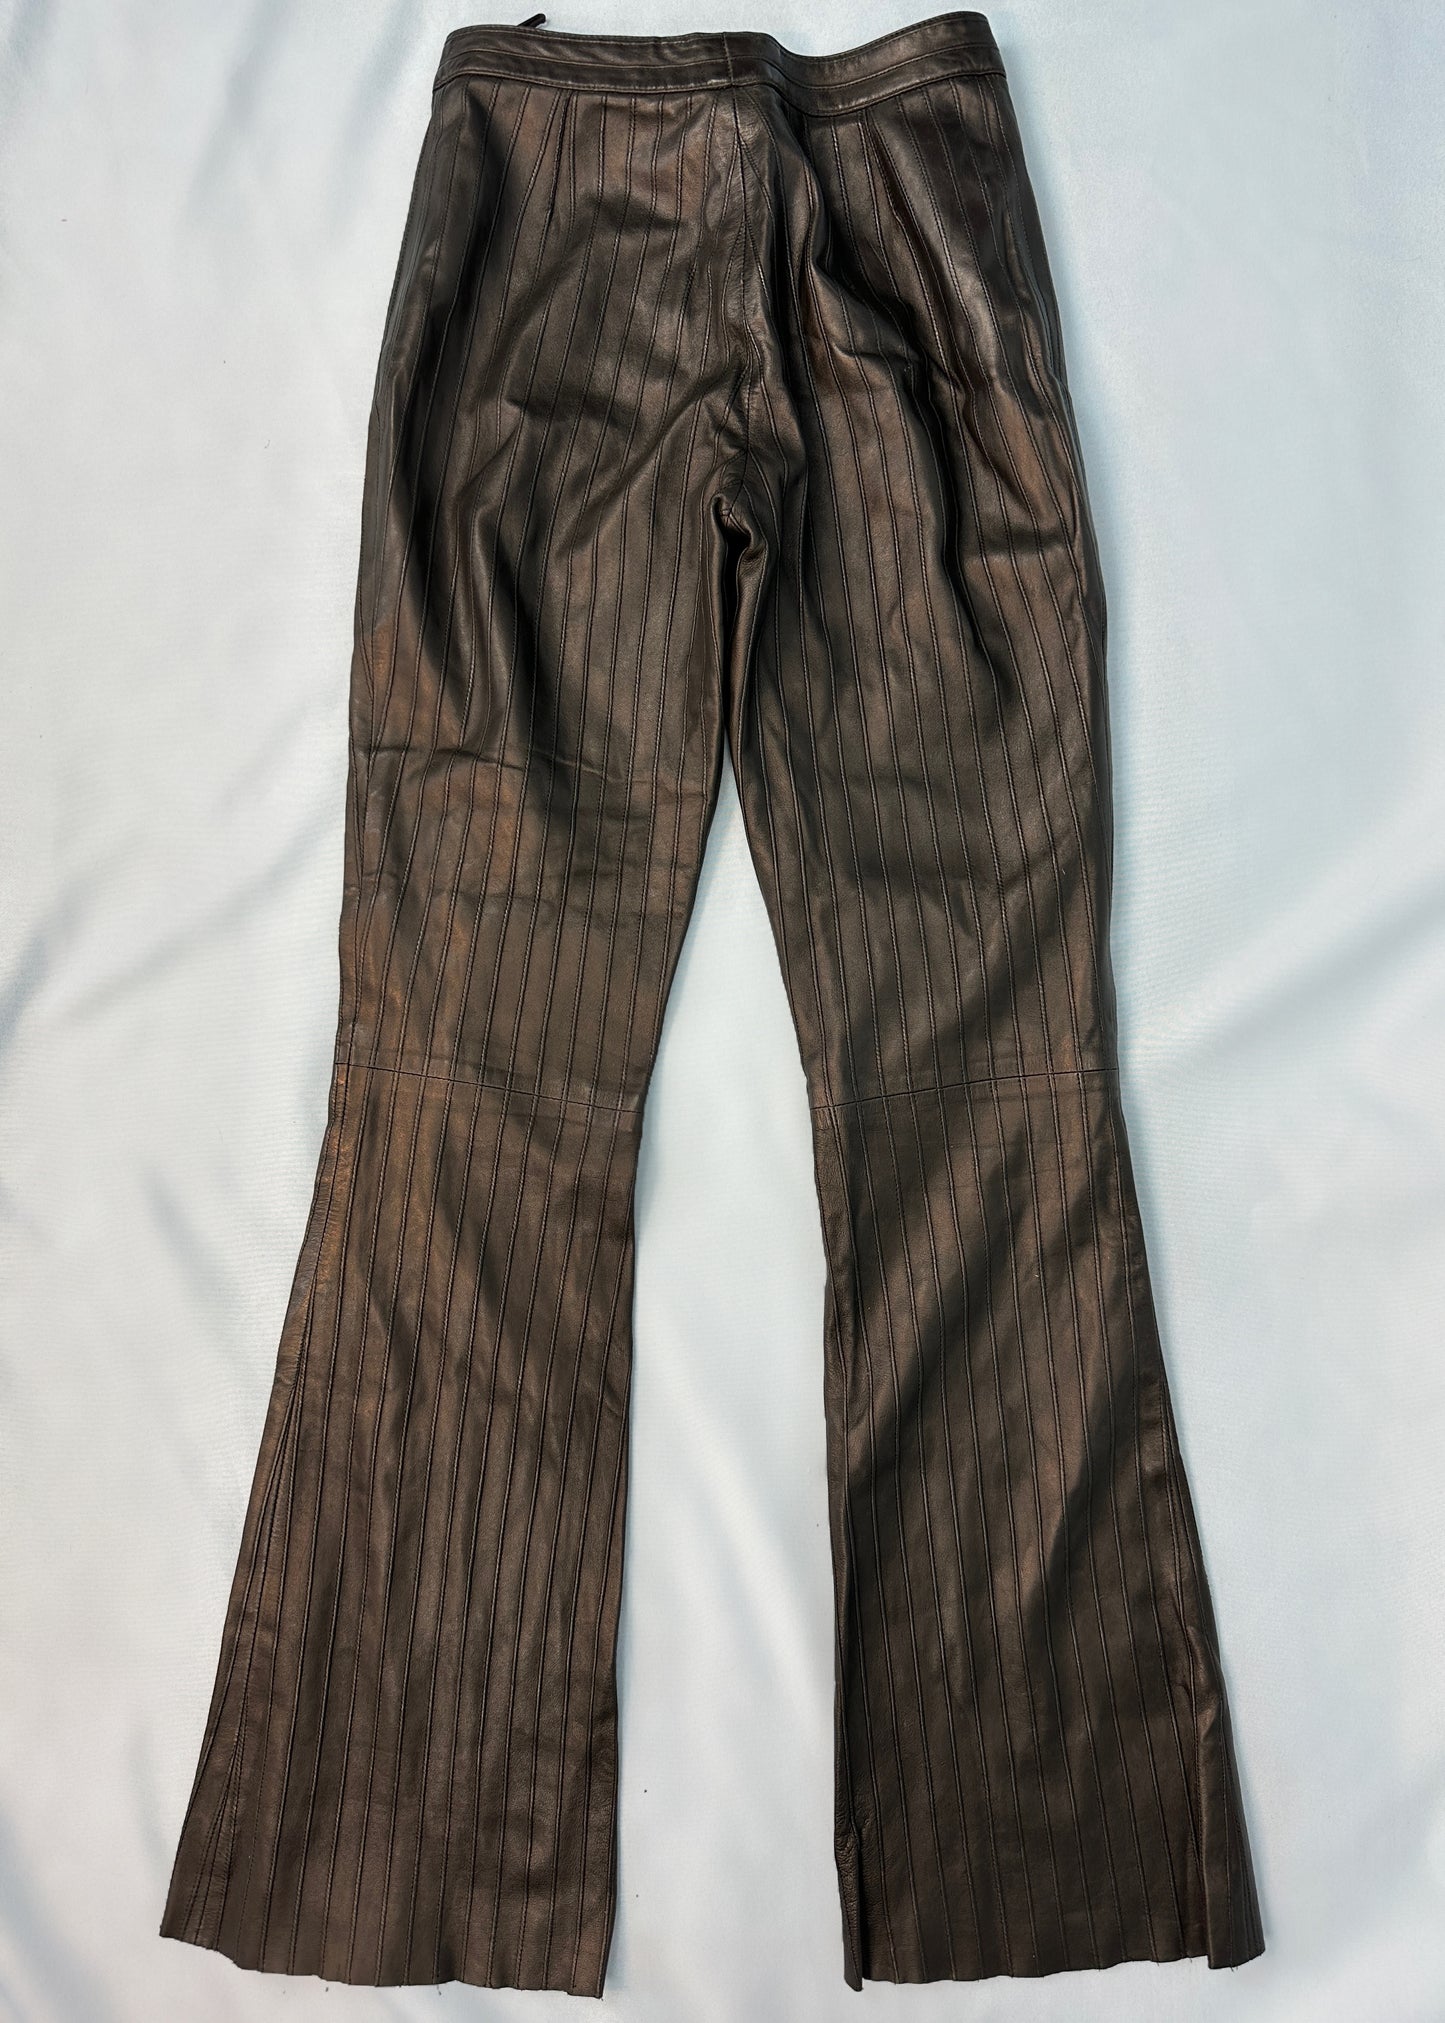 Gucci Fall 1999 Runway Black Leather Flared Pants